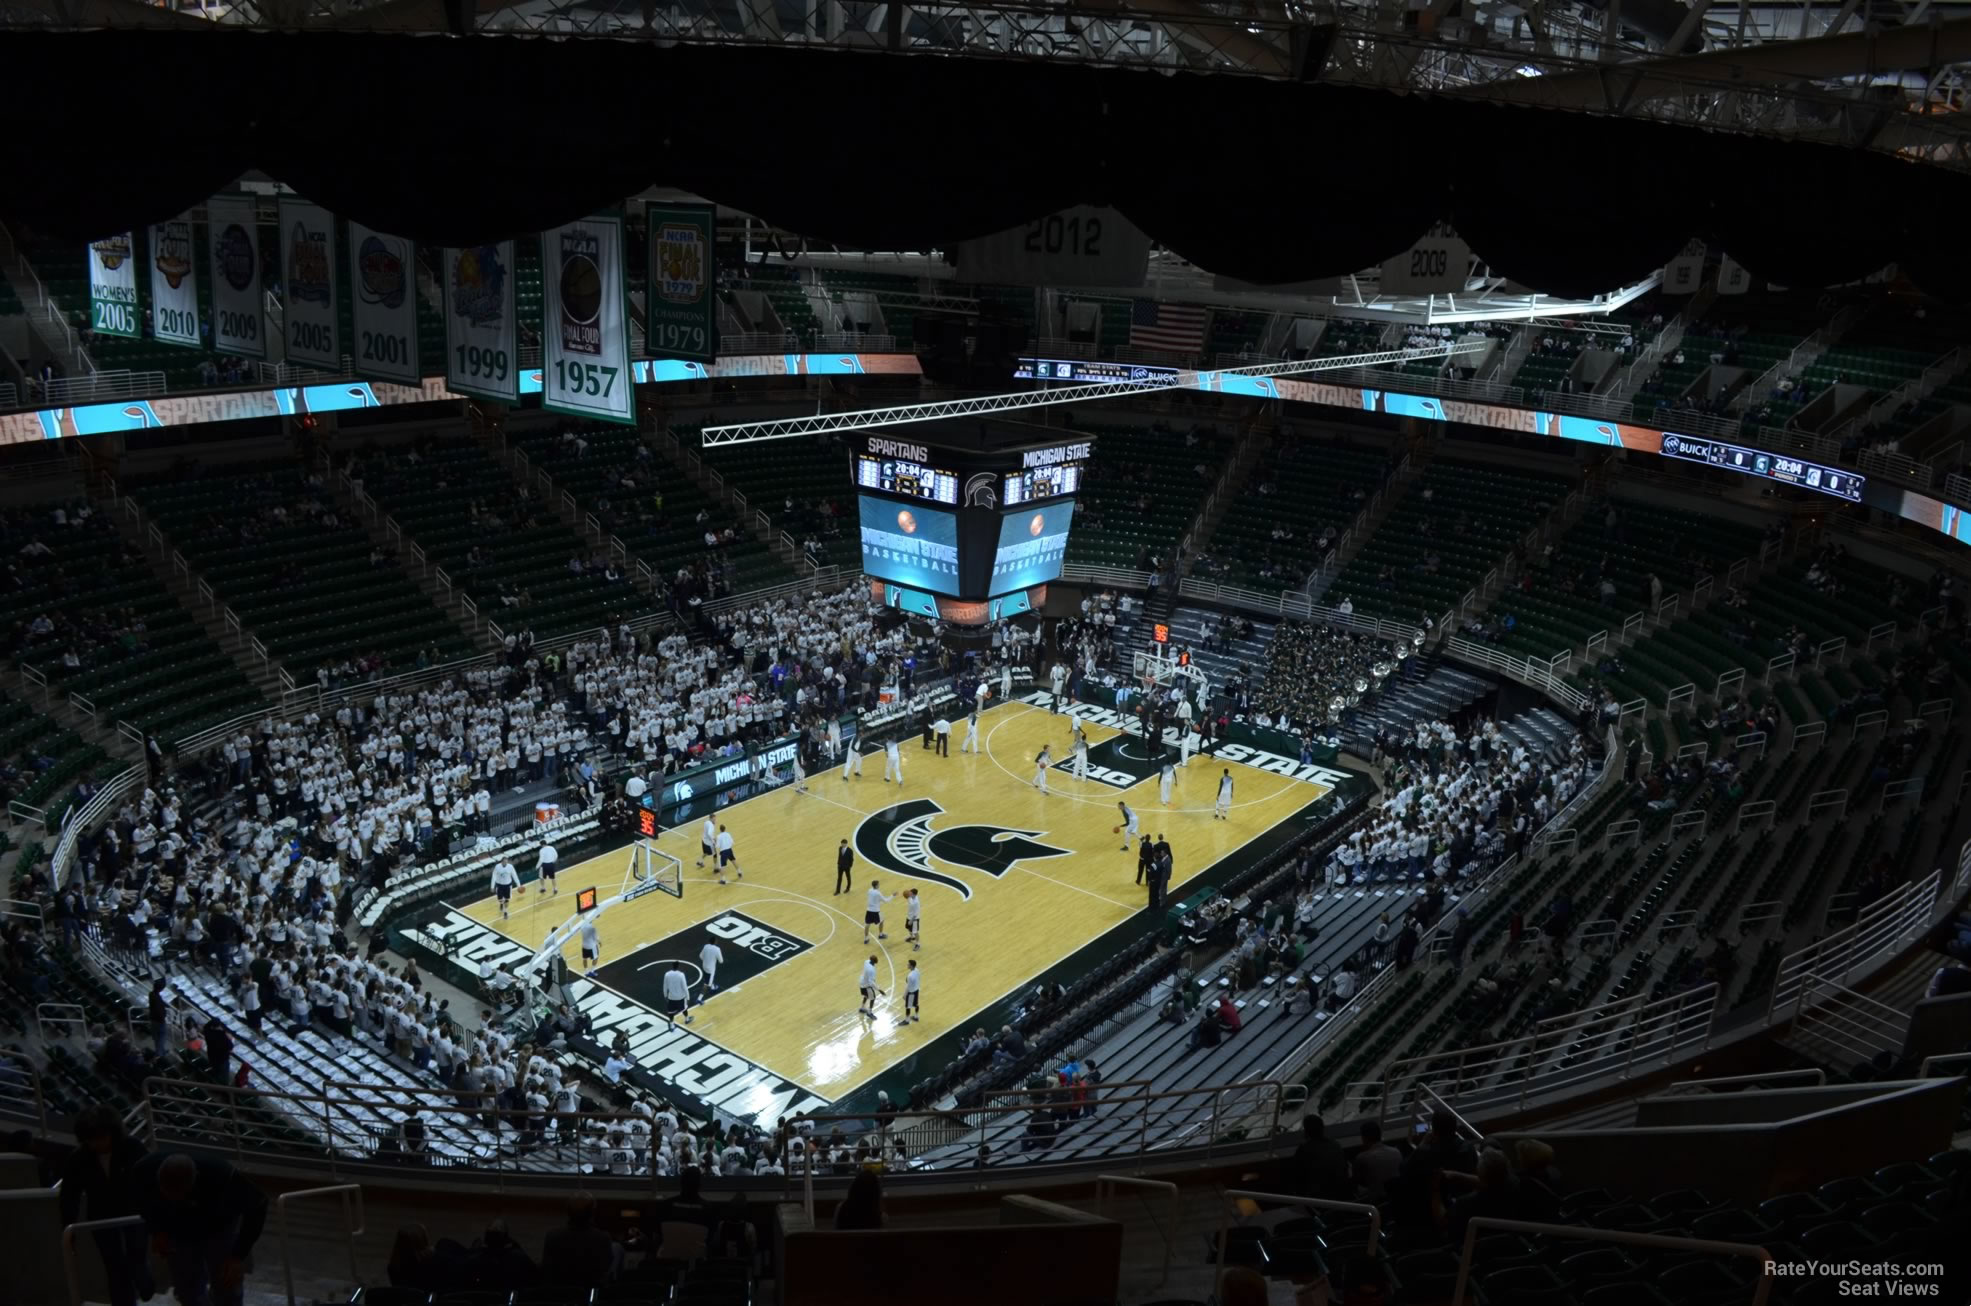 section 232, row 15 seat view  - breslin center